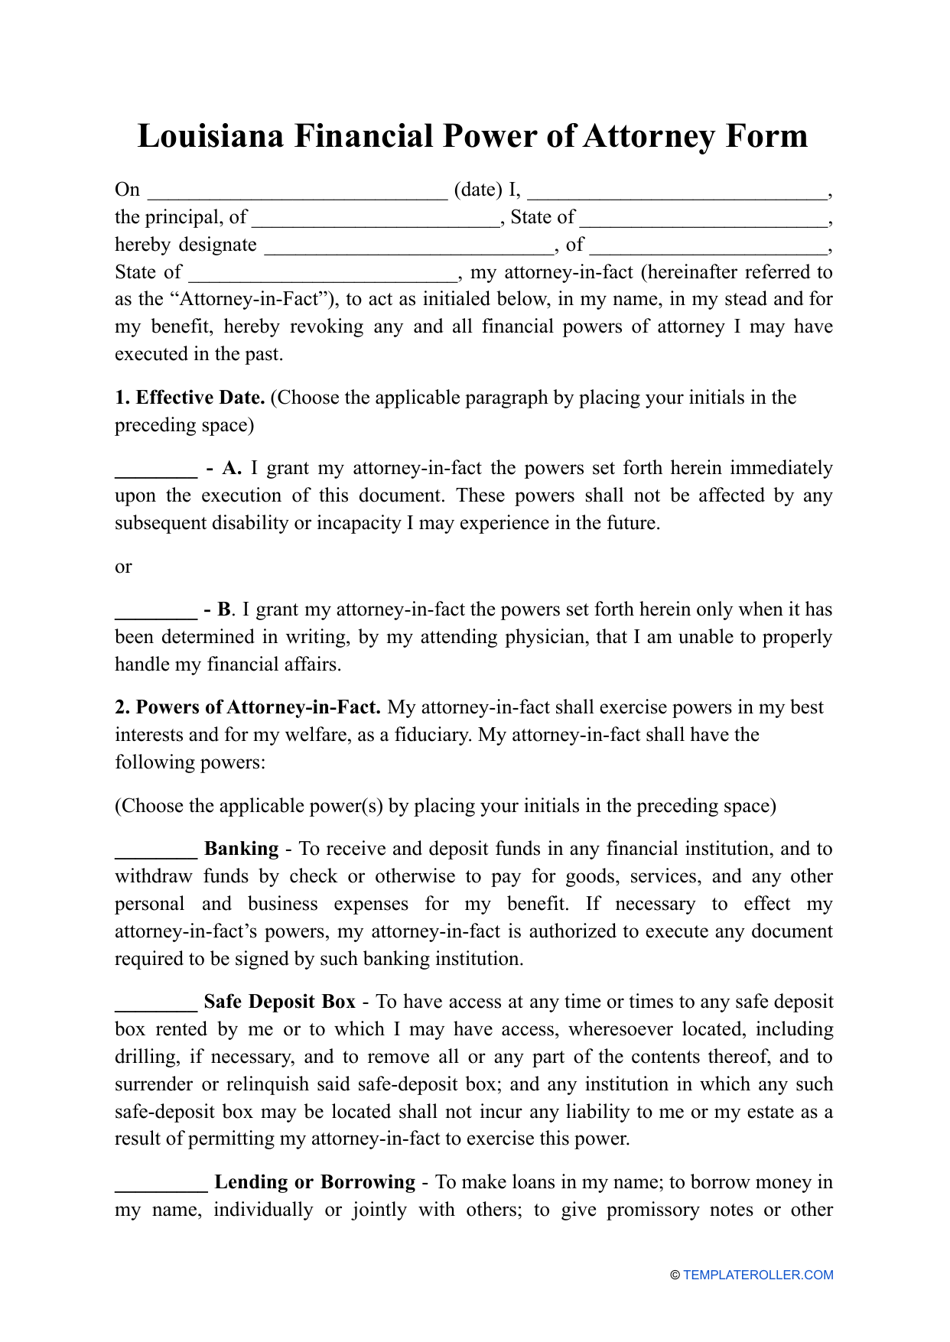 Financial Power of Attorney Form - Louisiana, Page 1